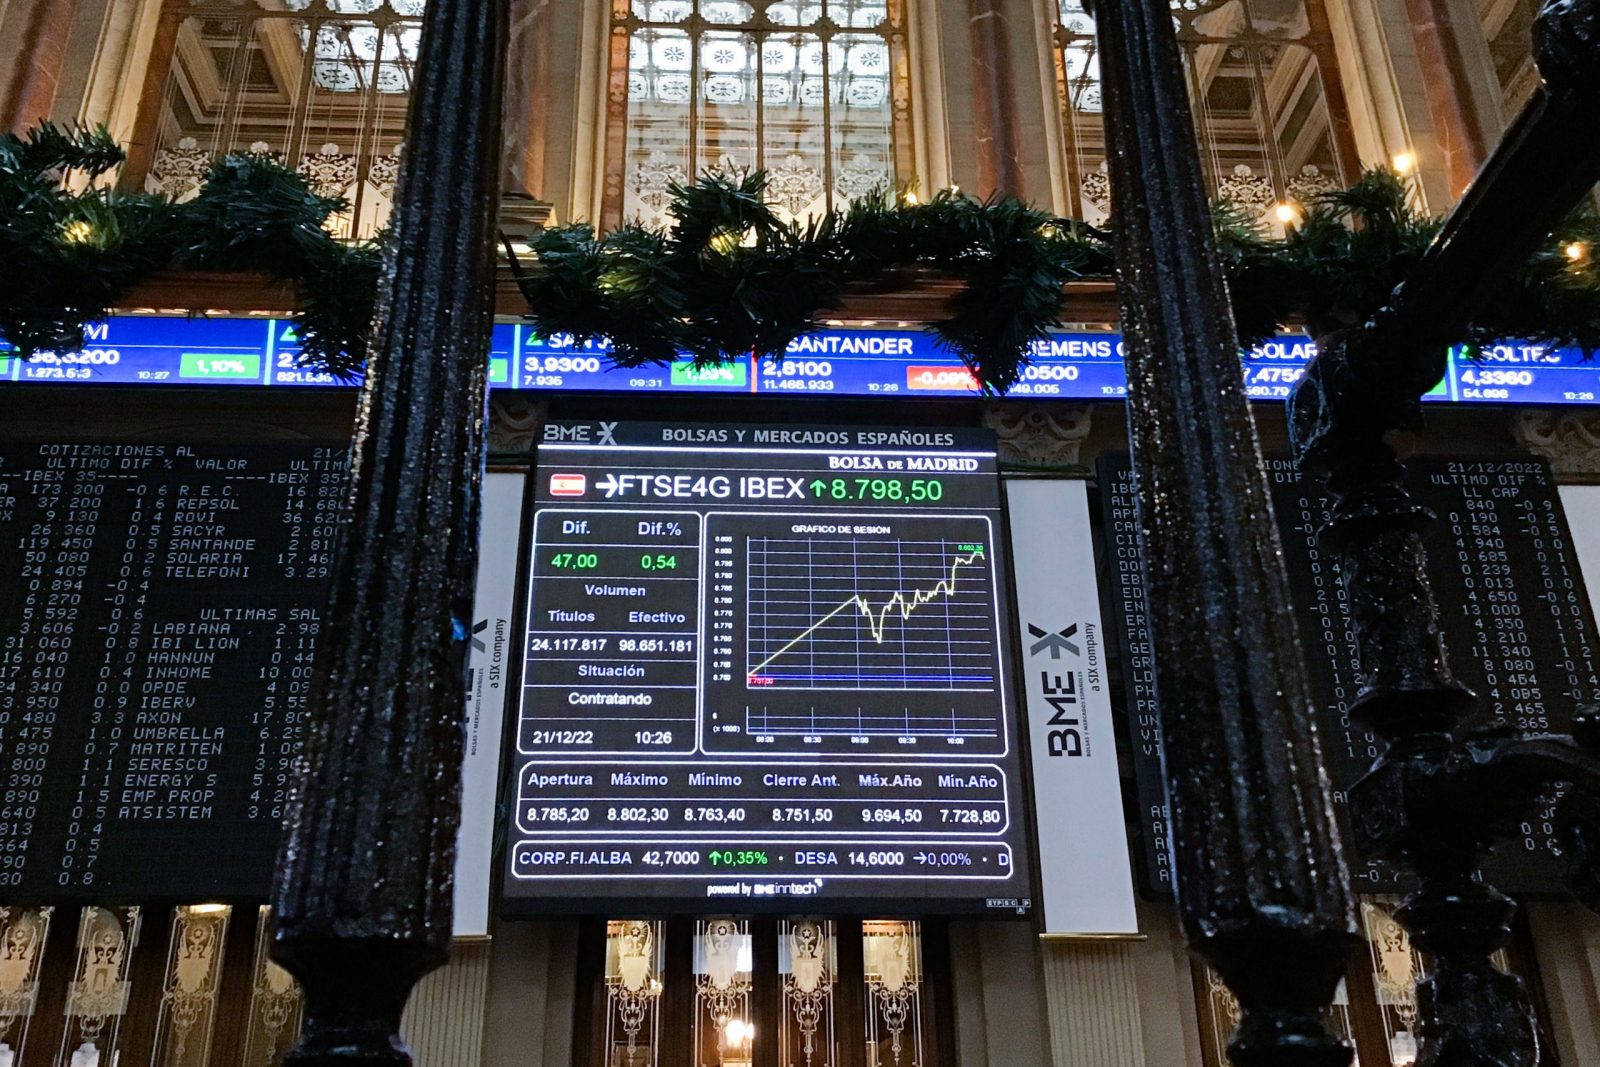 epa10375460 A screen displays a chart with the evolution of index FTSE4G IBEX at Madrid's Stock Exchange in Madrid, Spain, 21 December 2022. The index IBEX 35 rose by 0.43 percent at the opening of the trading session to reach 8,220.90 points.  EPA/VEGA ALONSO